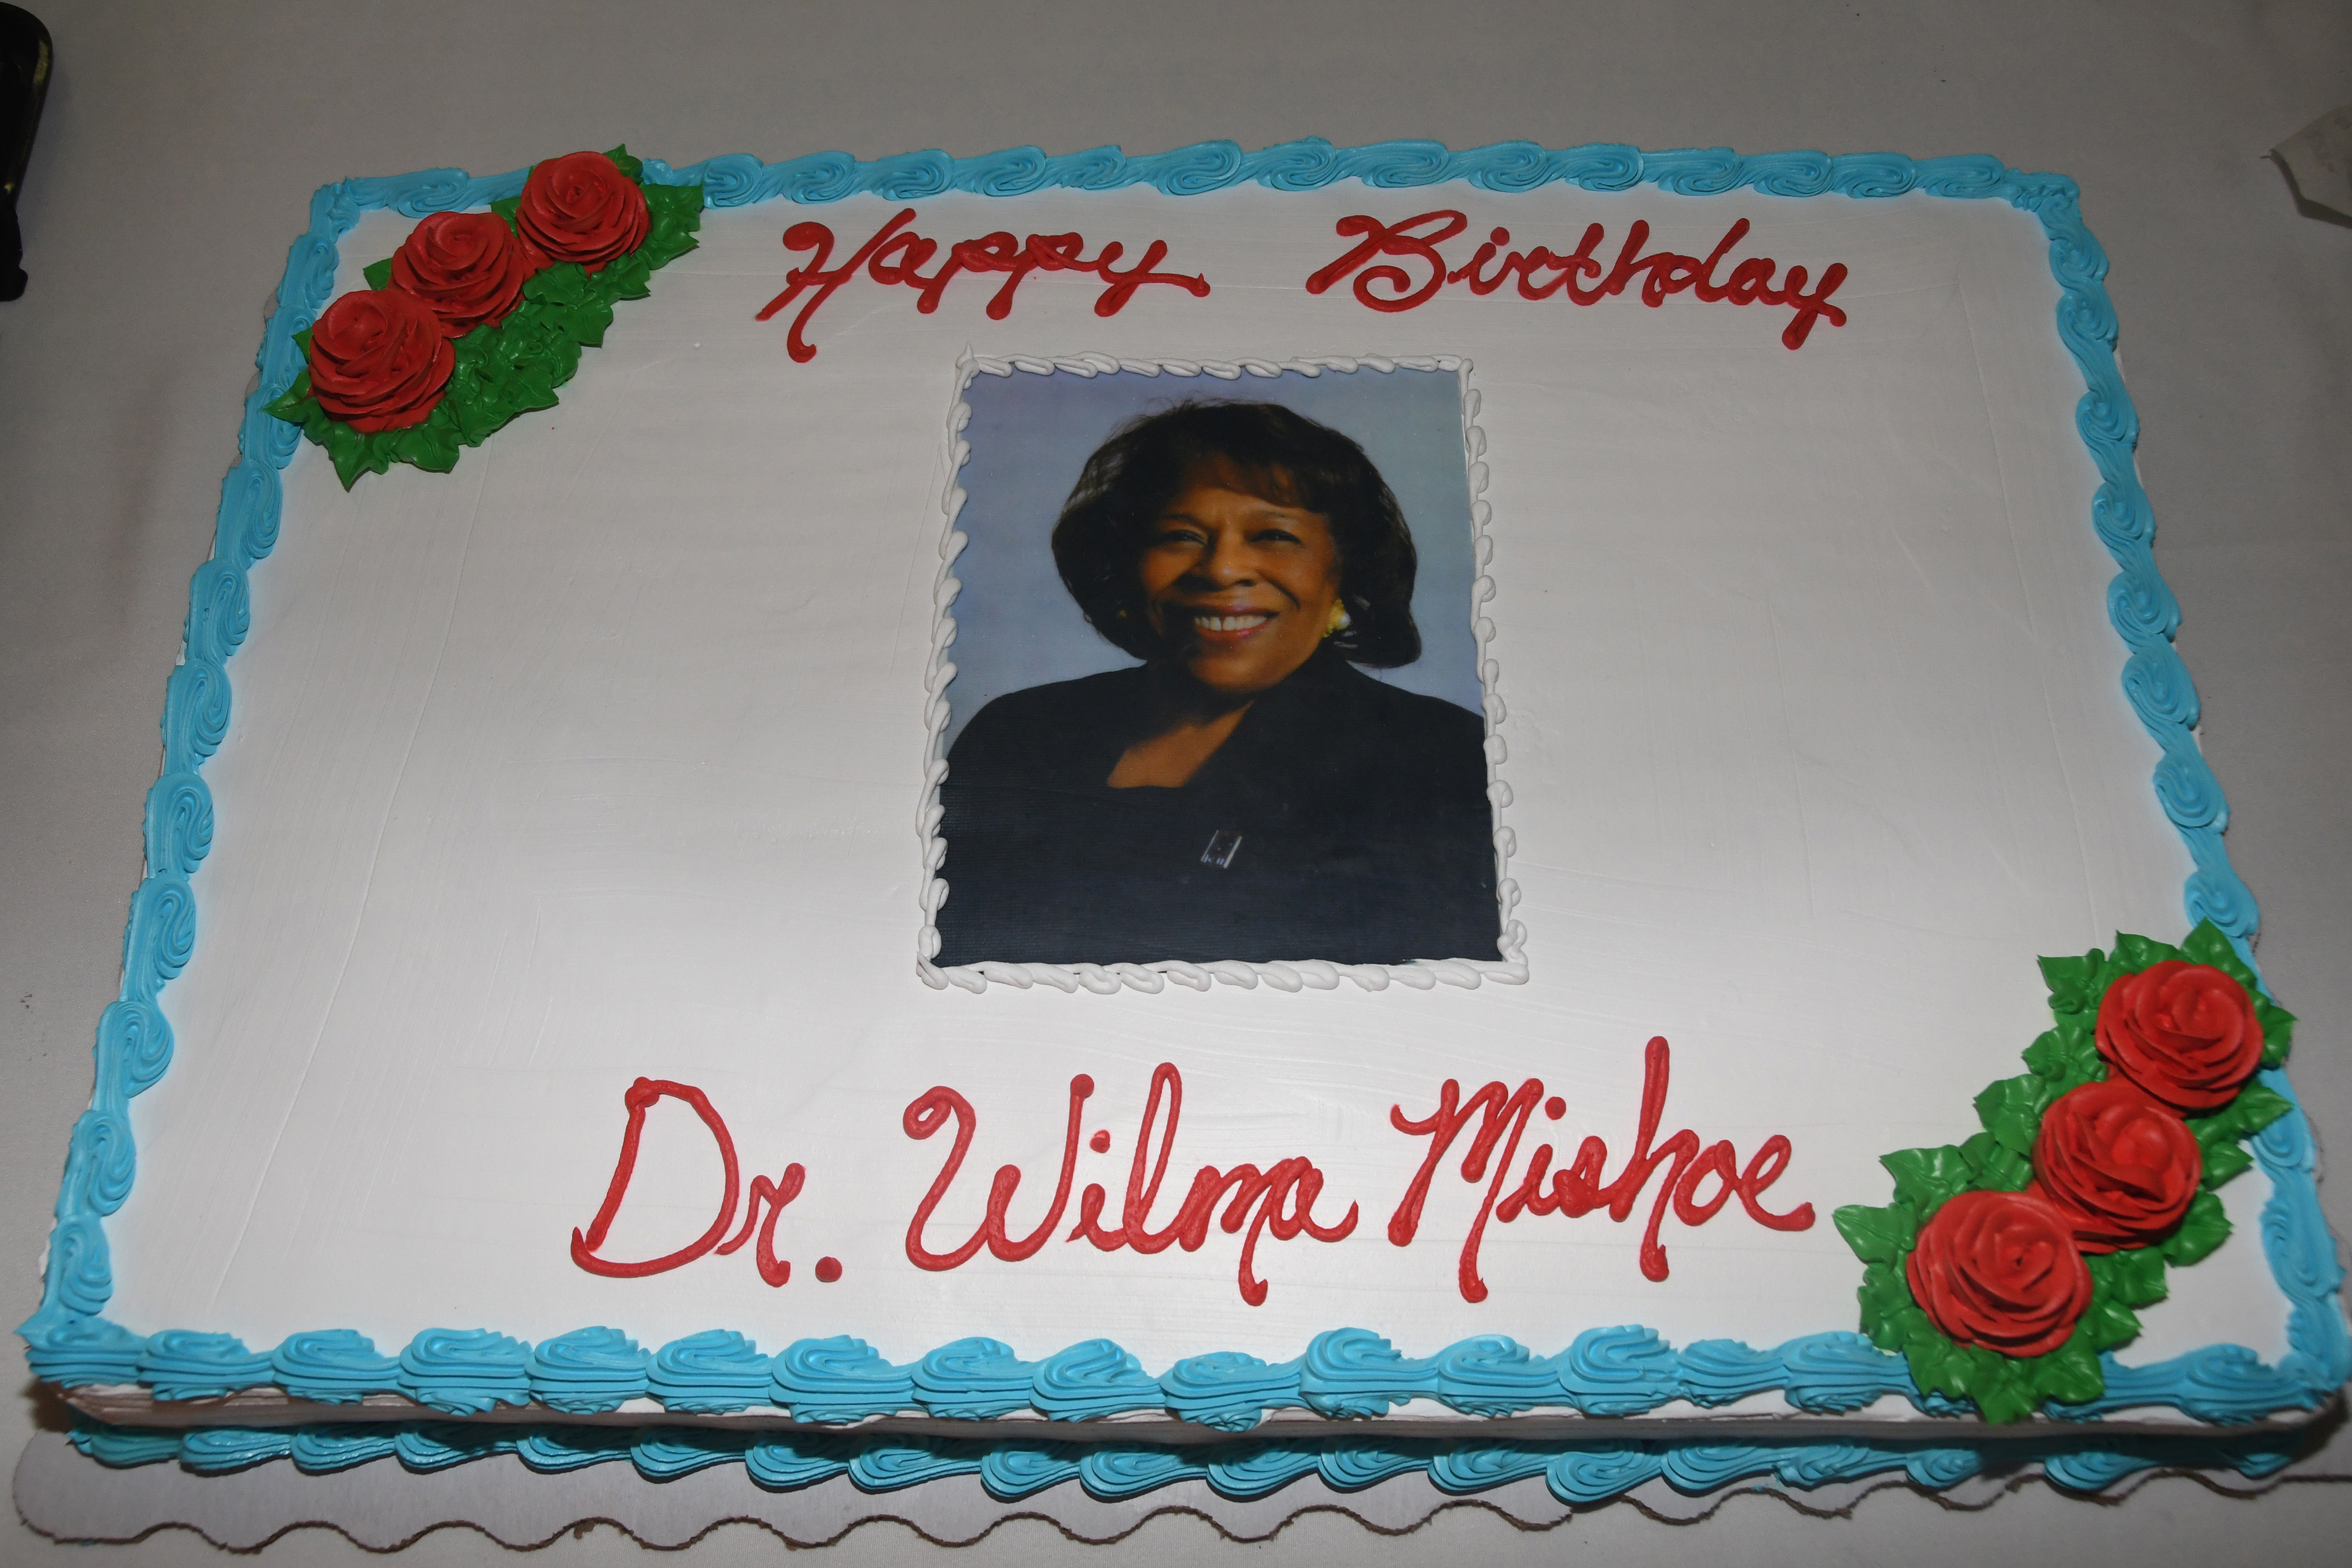 The cake that was made (and eaten) in celebration of Dr. Mishoe's 69th birthday.